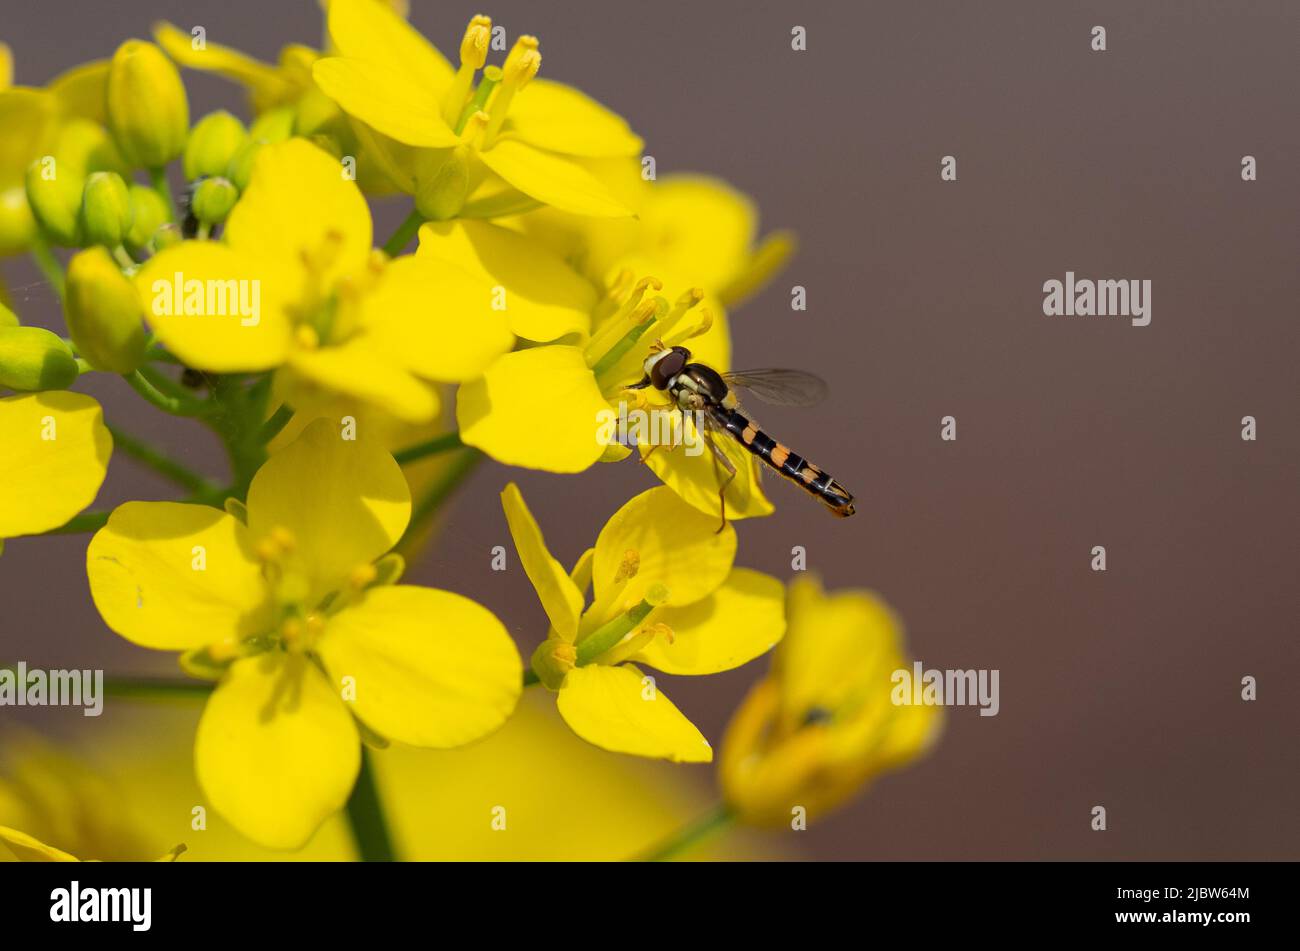 Hover fly feeding on yellow flowers Stock Photo